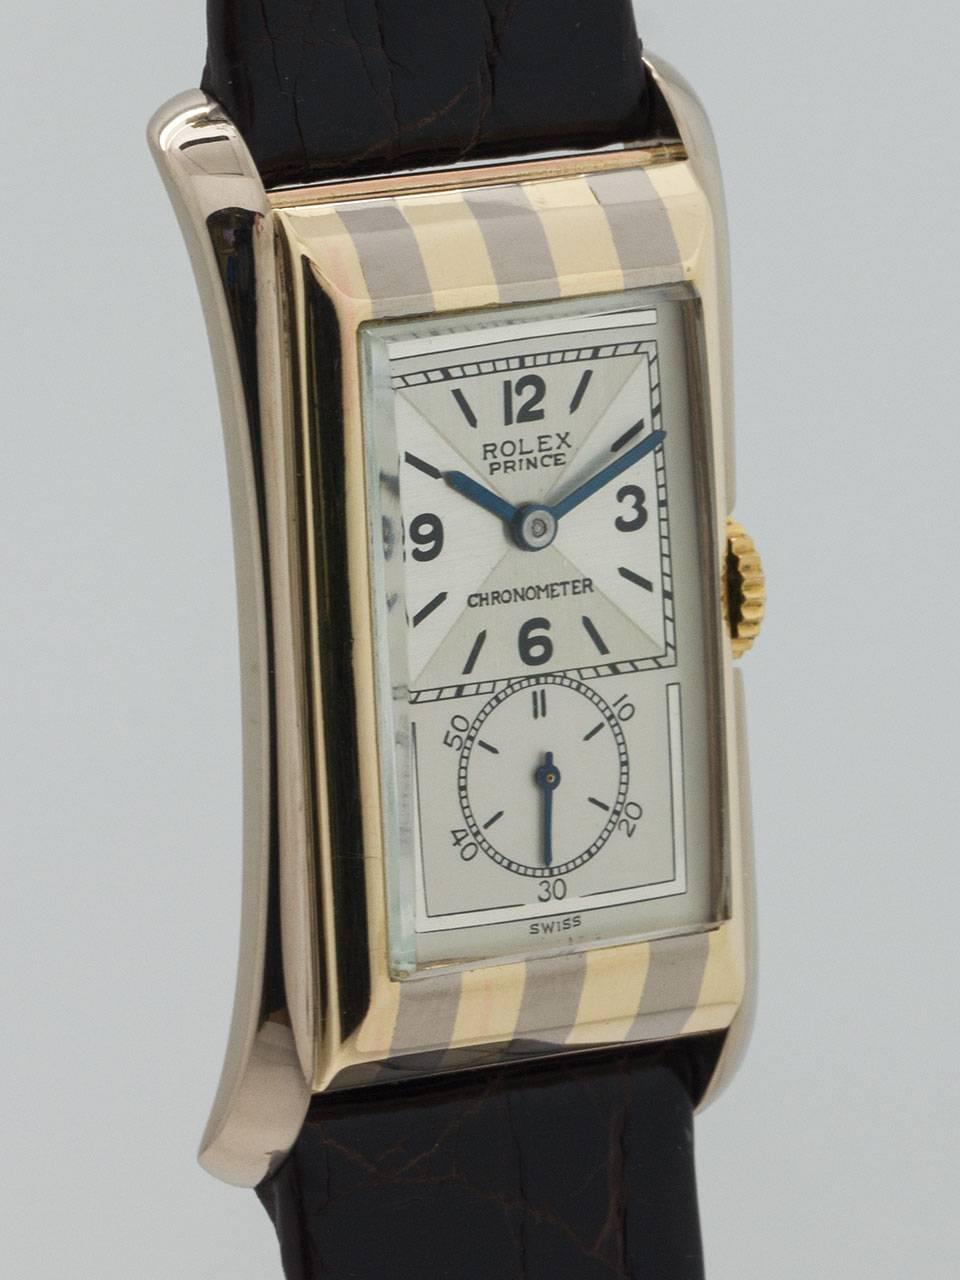 Rolex Prince 9K Yellow and White Gold Striped Branchard ref 1490 circa 1930s. 23 X 44mm case, rare and beautiful condition example with original striped case design. With 2 tone raised enamel dial and blued steel spade hands. Powered by calibre 300